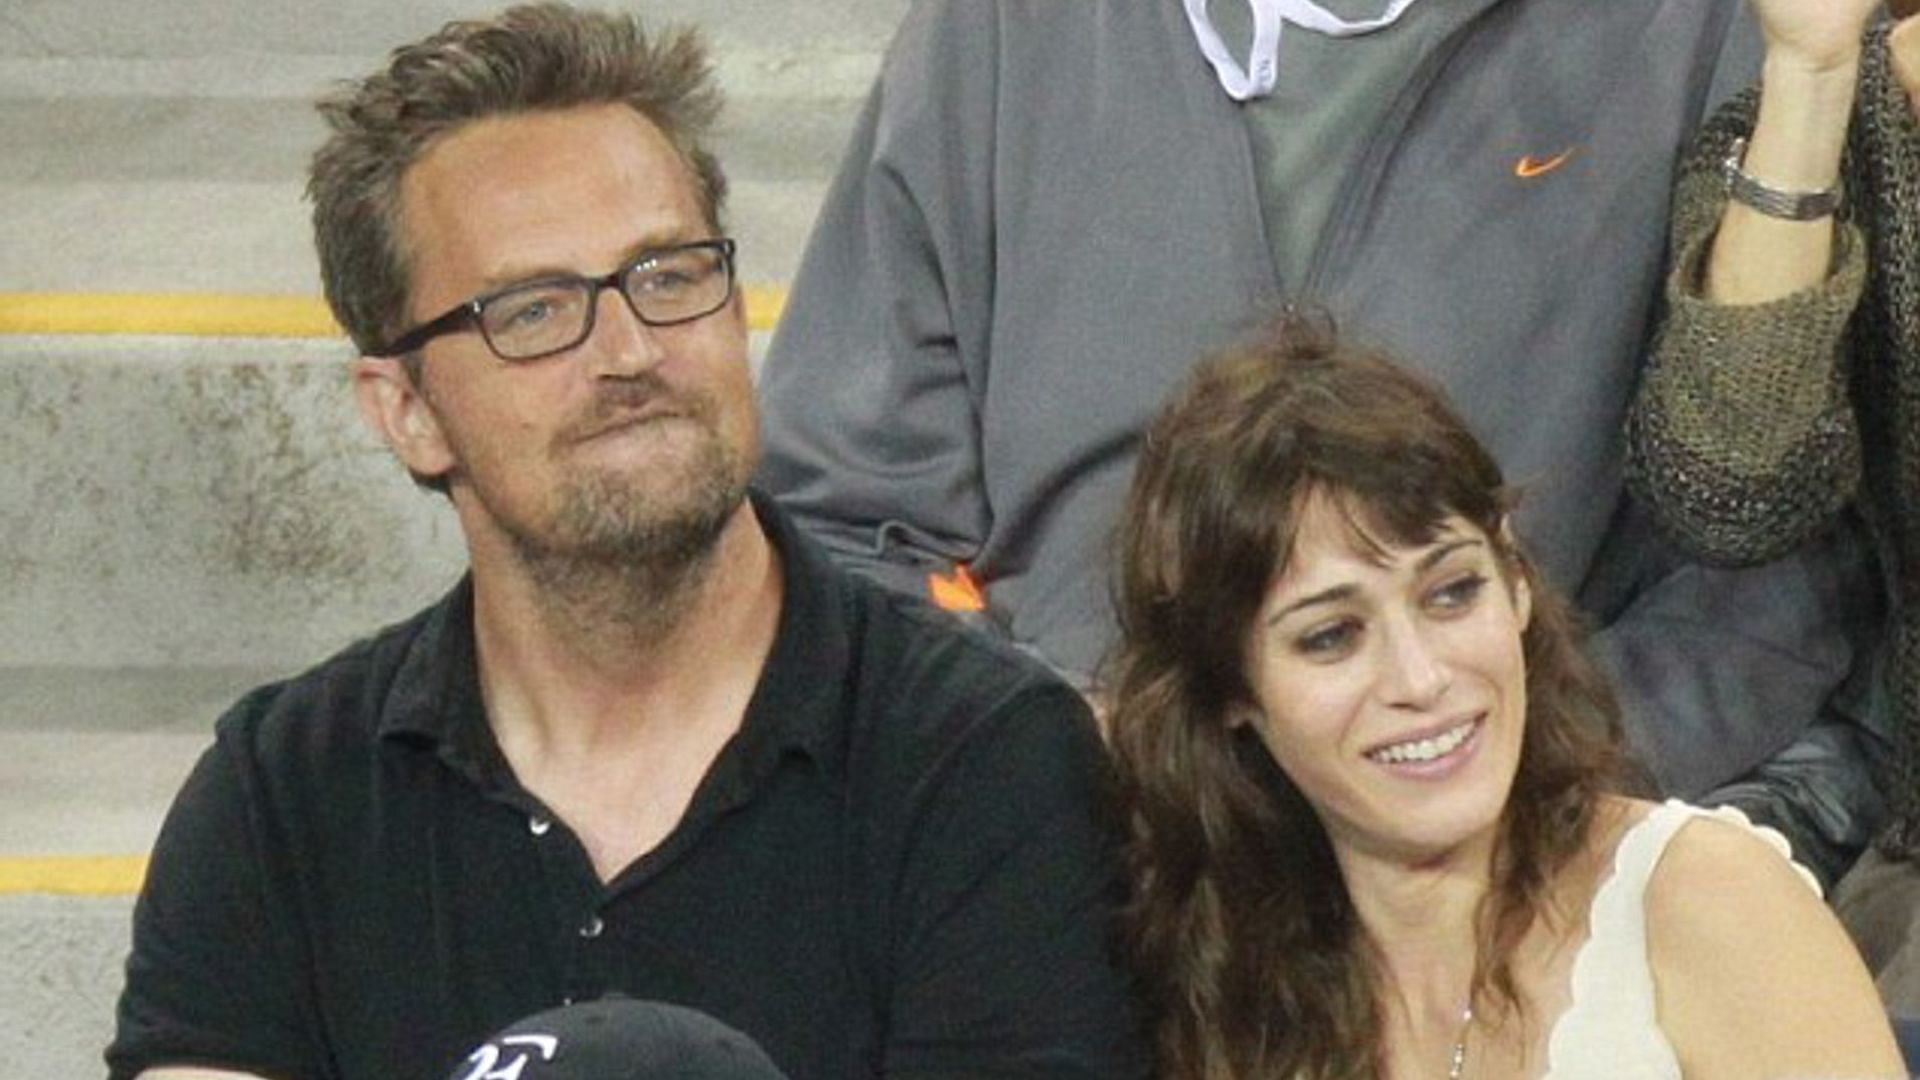 Perry and Lizzy Caplan (Image via Twitter)